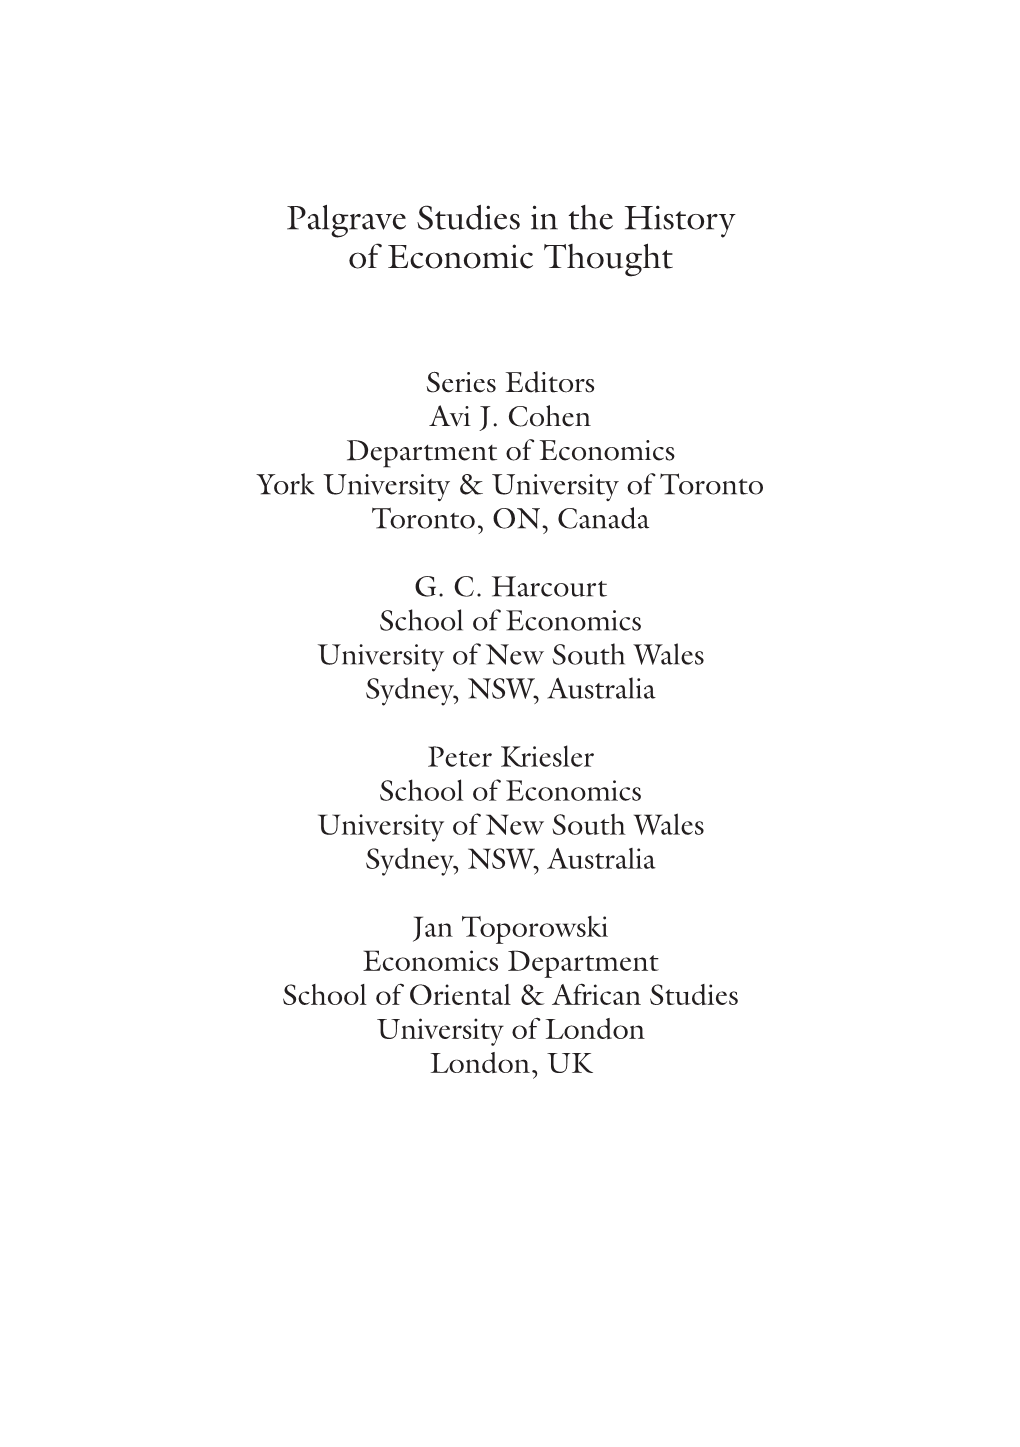 Palgrave Studies in the History of Economic Thought